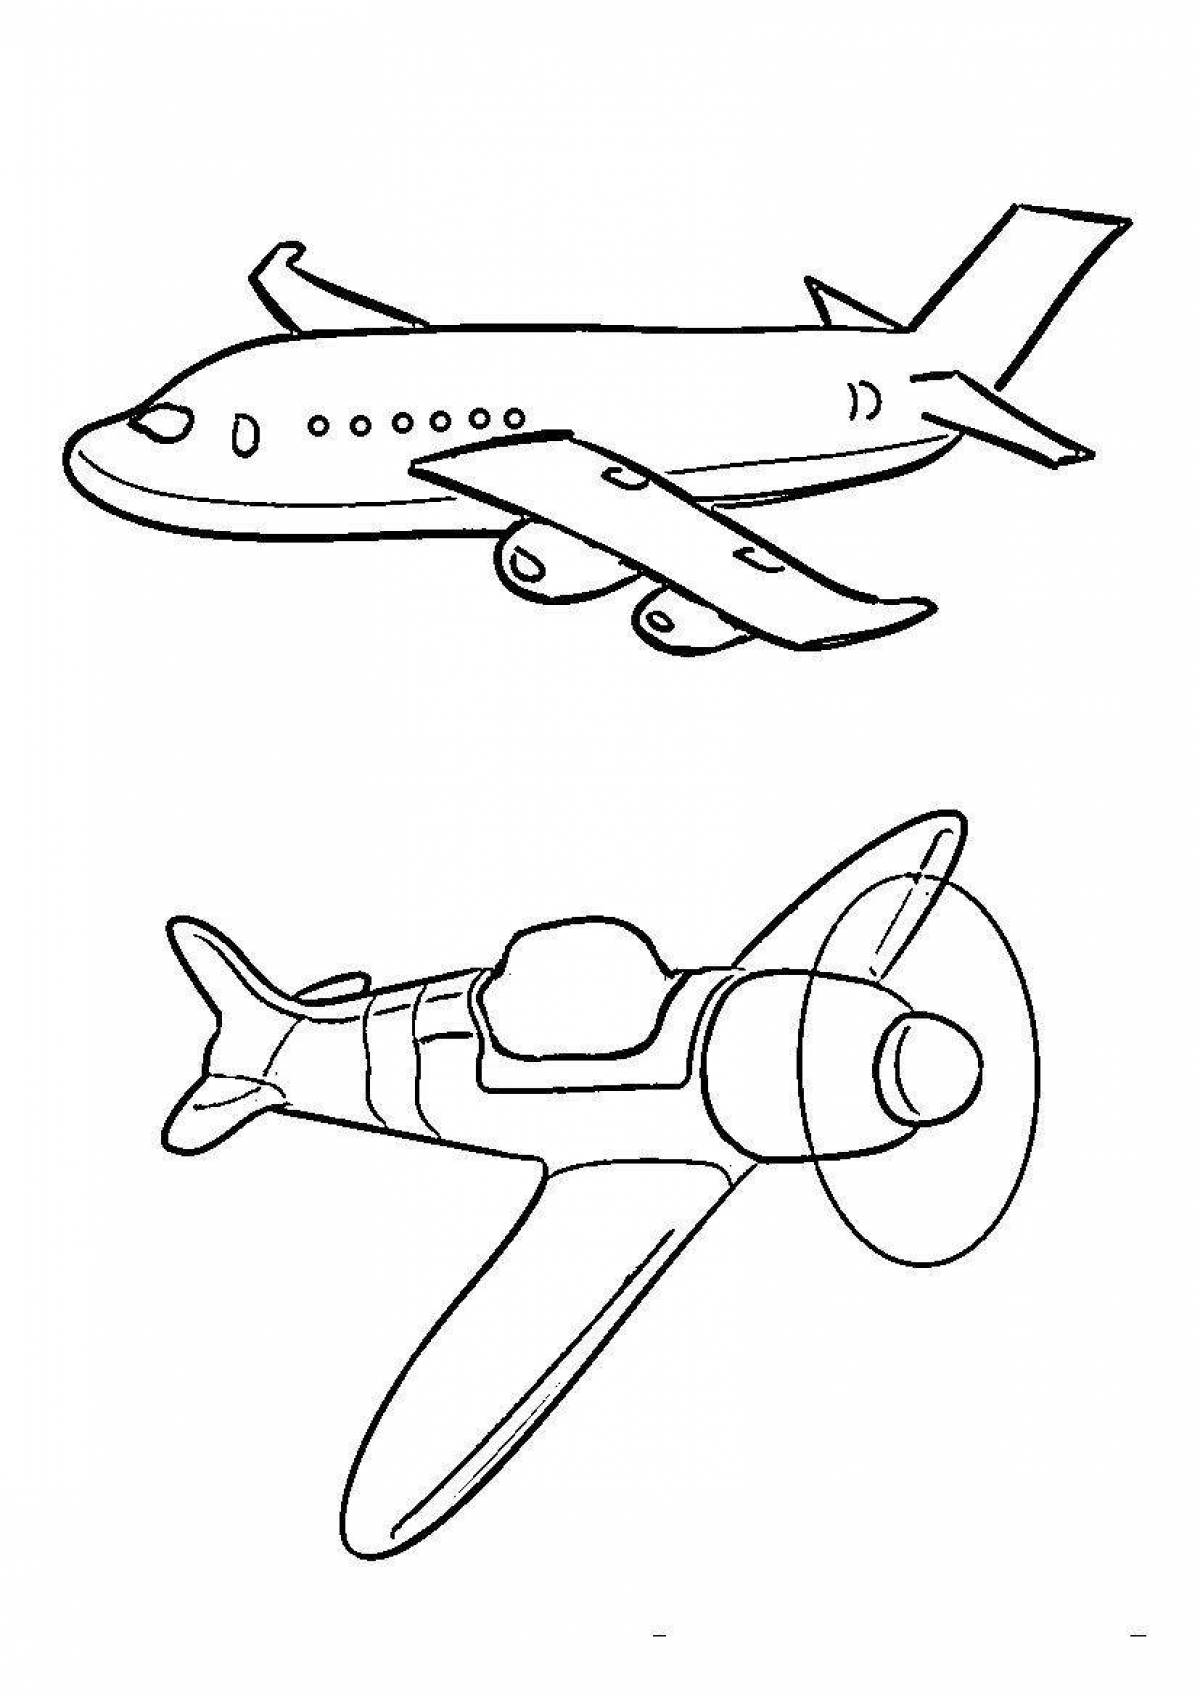 Great airplane coloring book for 5-6 year olds